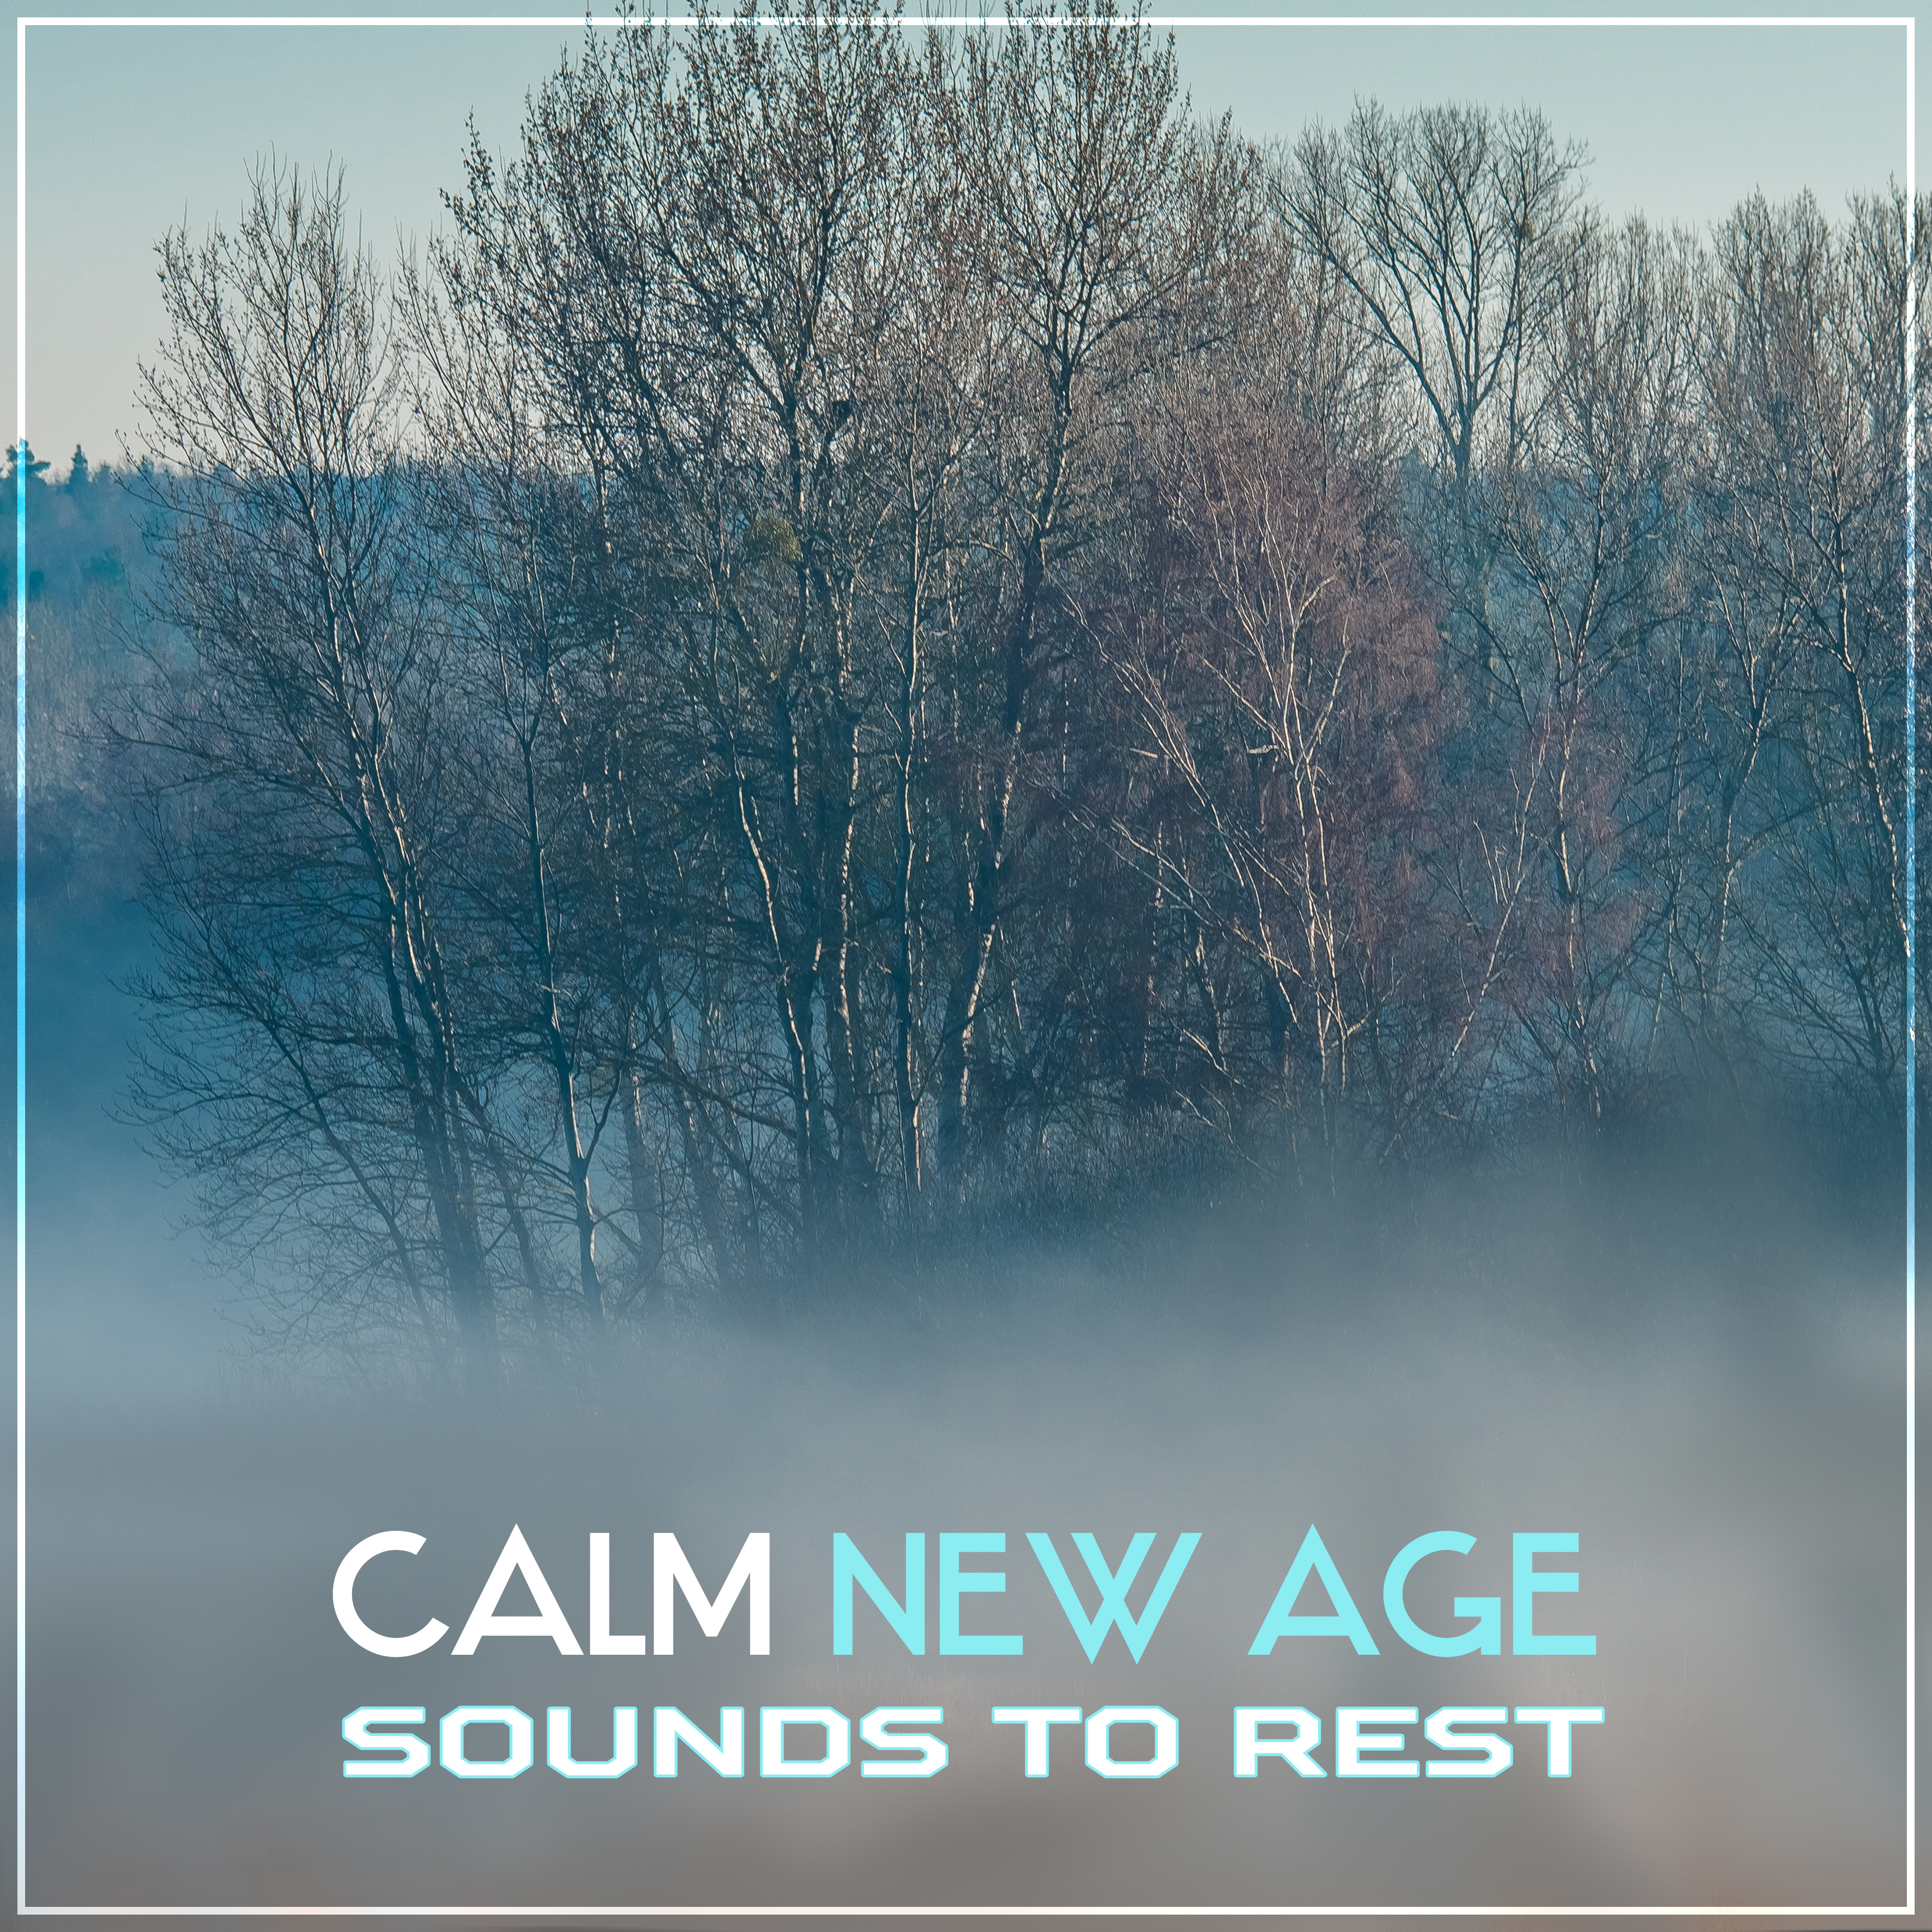 Calm New Age Sounds to Rest  Relaxing Sounds, Peaceful Waves, Inner Rest, Spirit Journey, New Age Piano